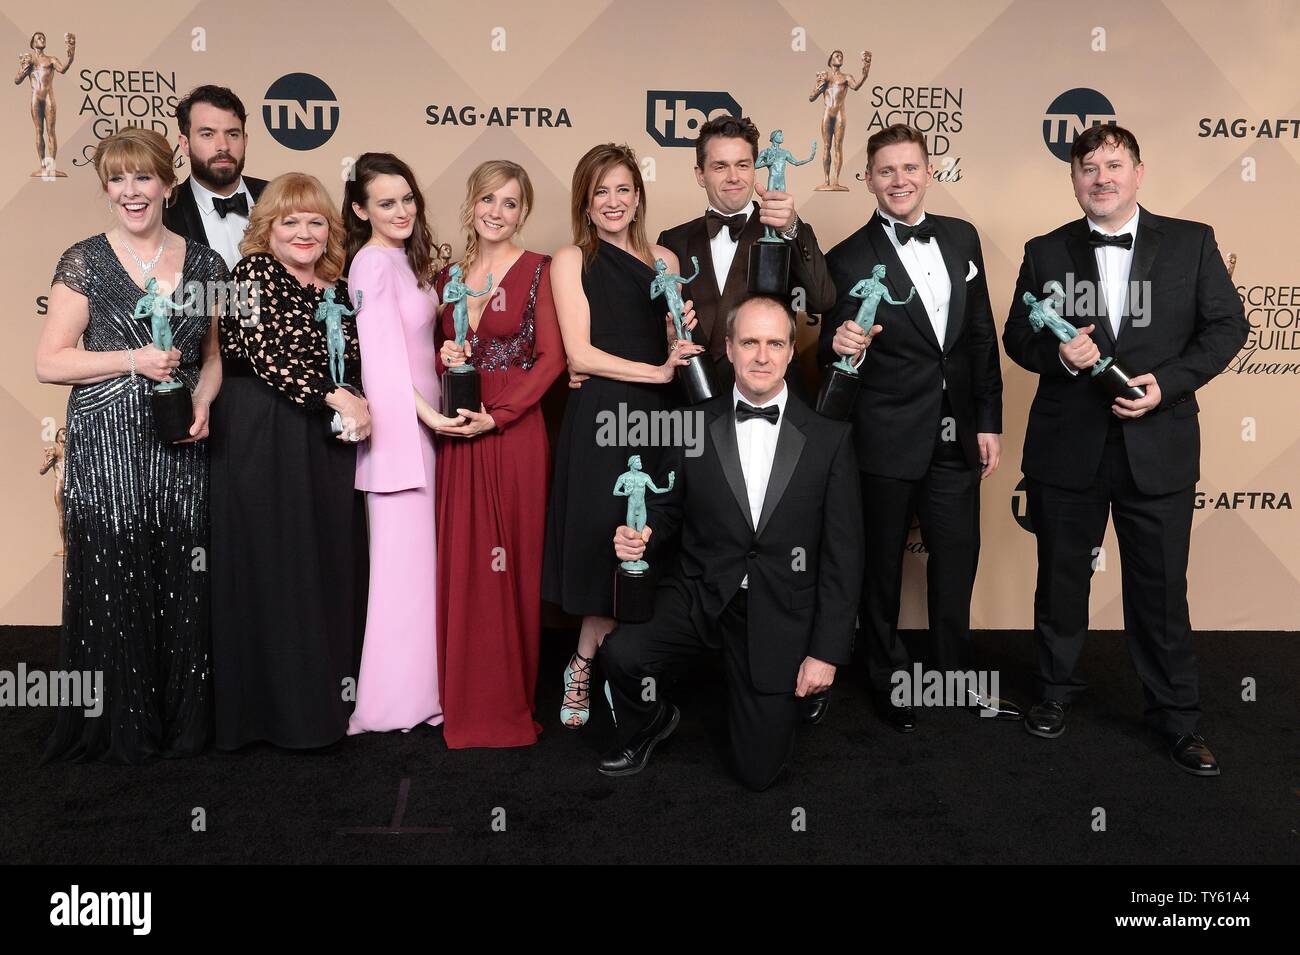 From left, actors Phyllis Logan, Tom Cullen, Lesley Nicol, Sophie McShera, Joanne Froggatt, Raquel Cassidy, Kevin Doyle, Julian Ovenden, Allen Leech and Jeremy Swift, winners of Outstanding Performance by an Ensemble in a Drama Series for 'Downton Abbey,' appear backstage during the 22nd annual Screen Actors Guild Awards at the Shrine Auditorium & Expo Hall in Los Angeles, California on January 30, 2016. Photo by Jim Ruymen/UPI Stock Photo